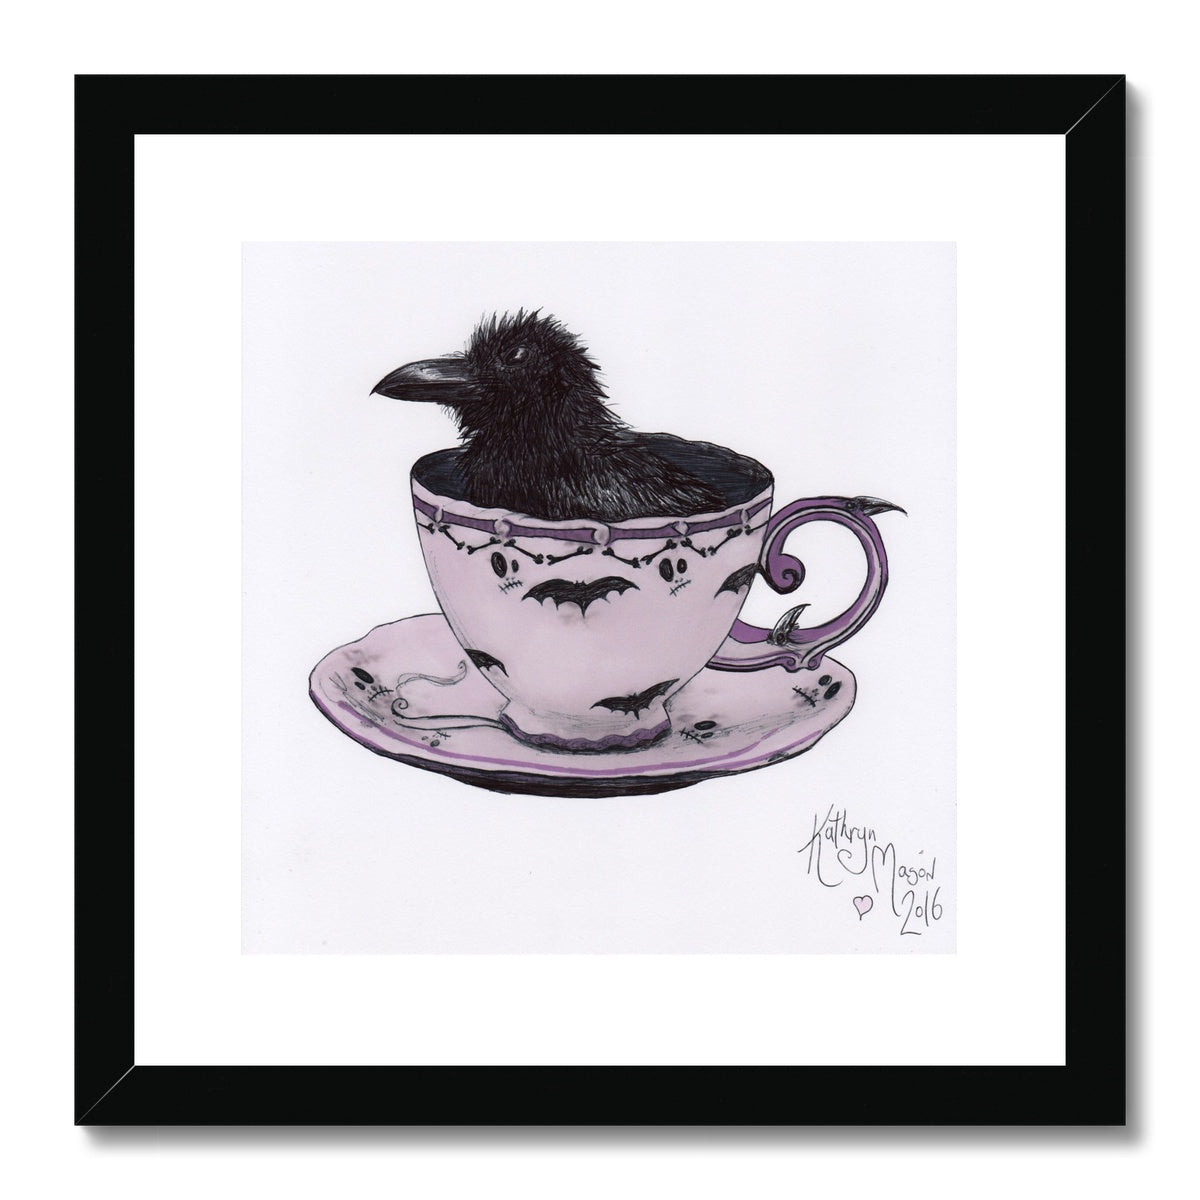 Photo showing 'Sheltering from a Storm in a Teacup' Cute Baby Crow Gothic Fine Art Print from artist Kathryn Mason's original drawing. Framed and Mounted. Shown here with black frame.